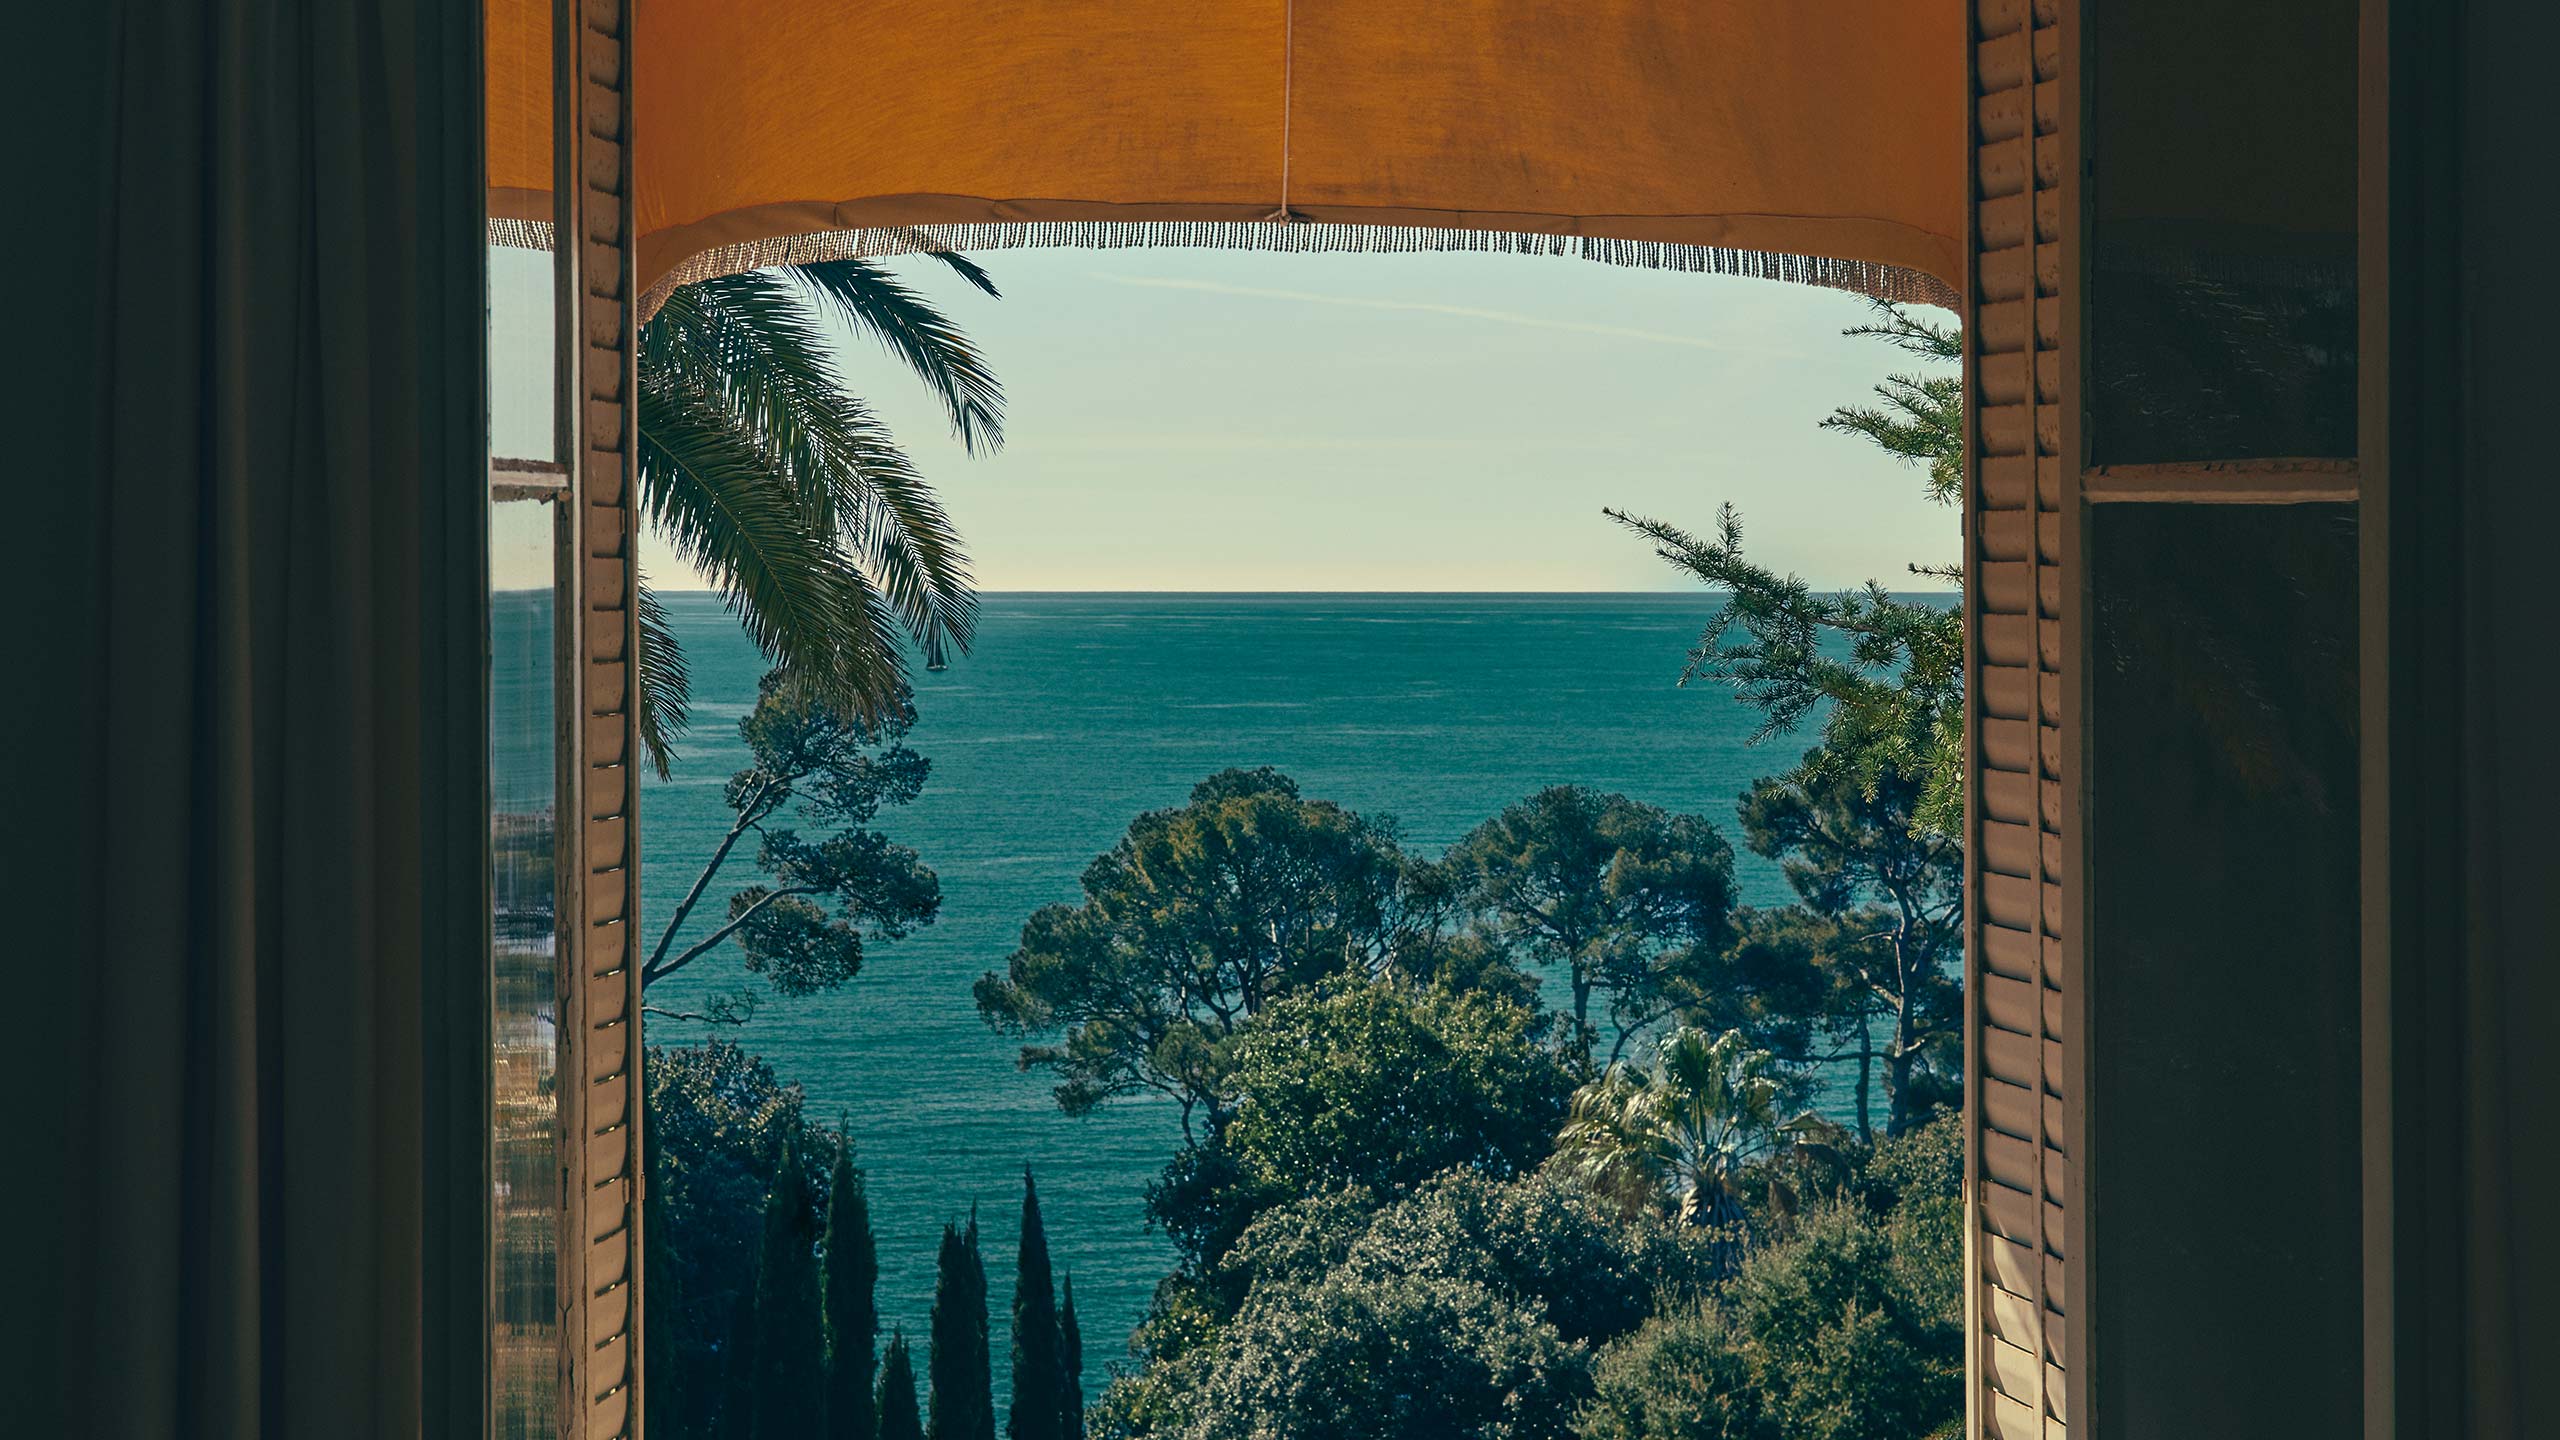 tropical view out a window overlooking water and trees